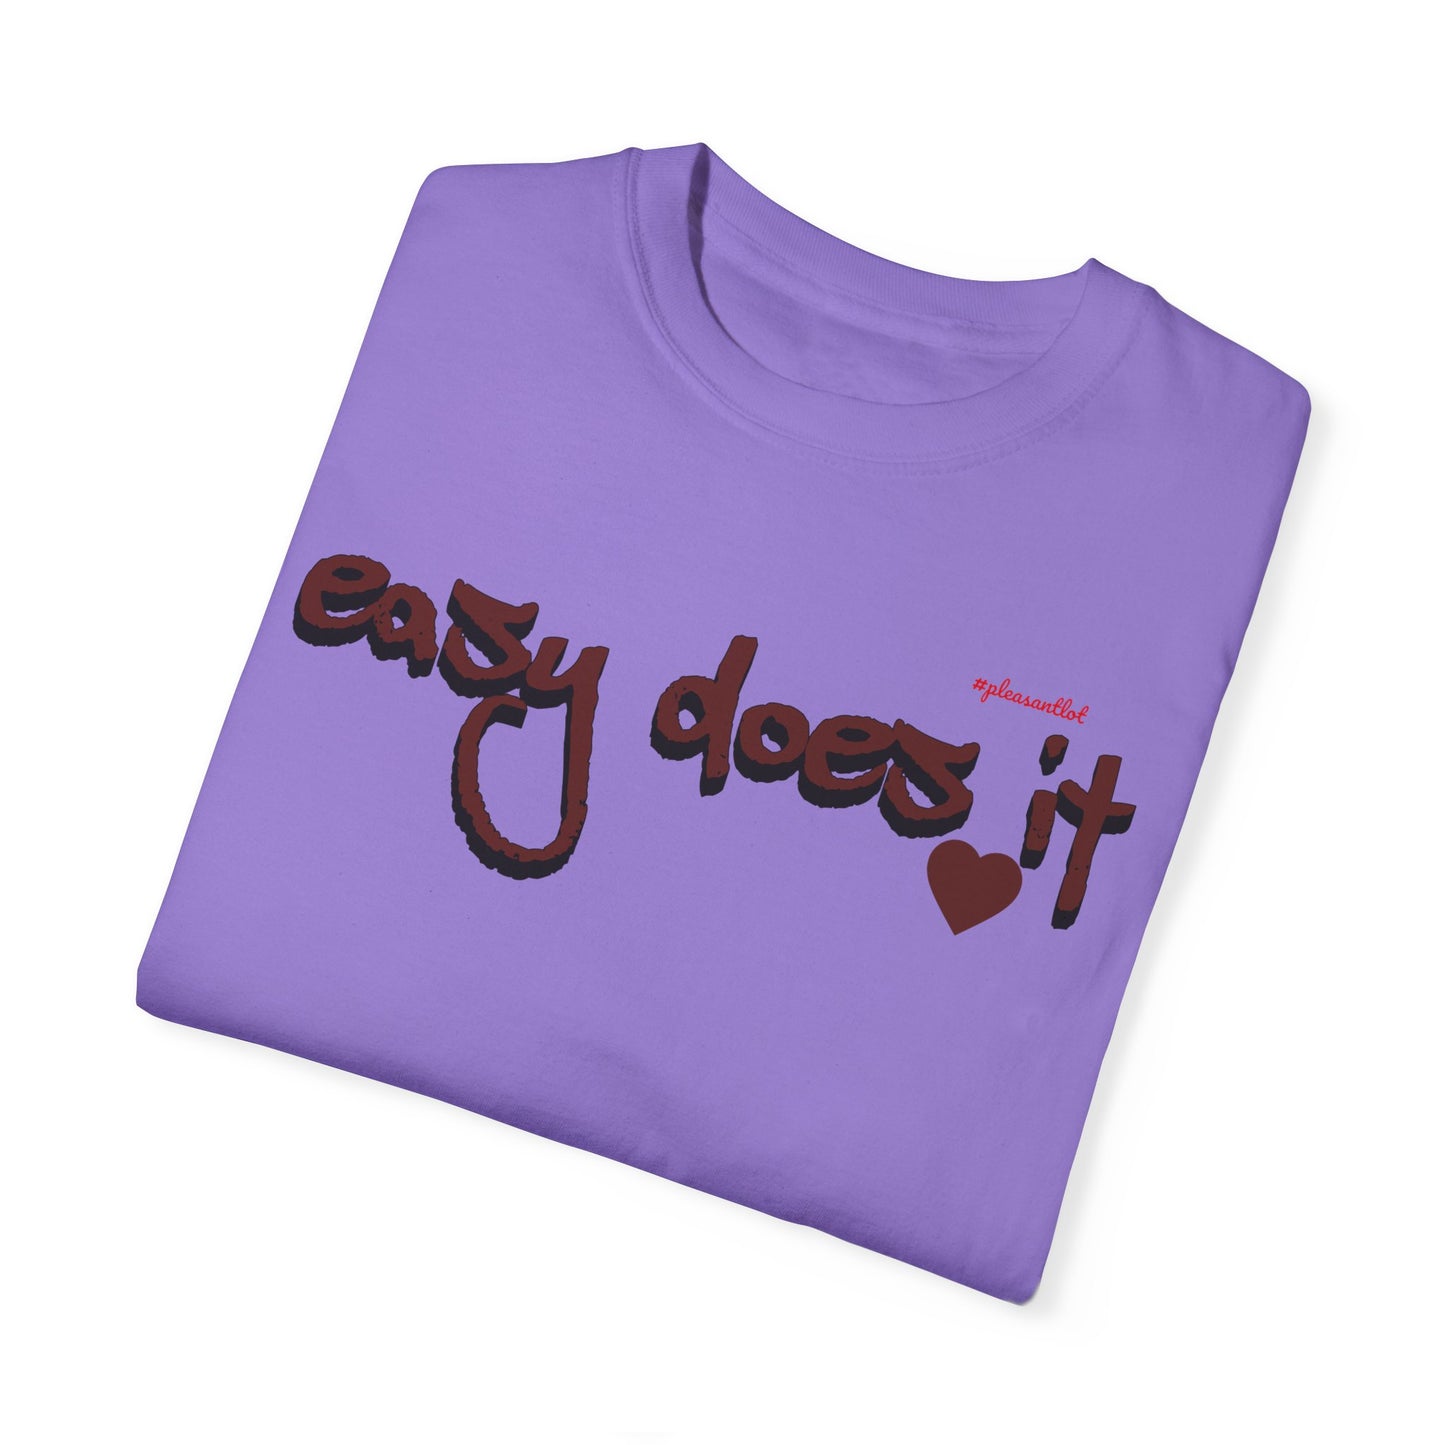 Easy Does it Unisex Garment-Dyed T-shirt